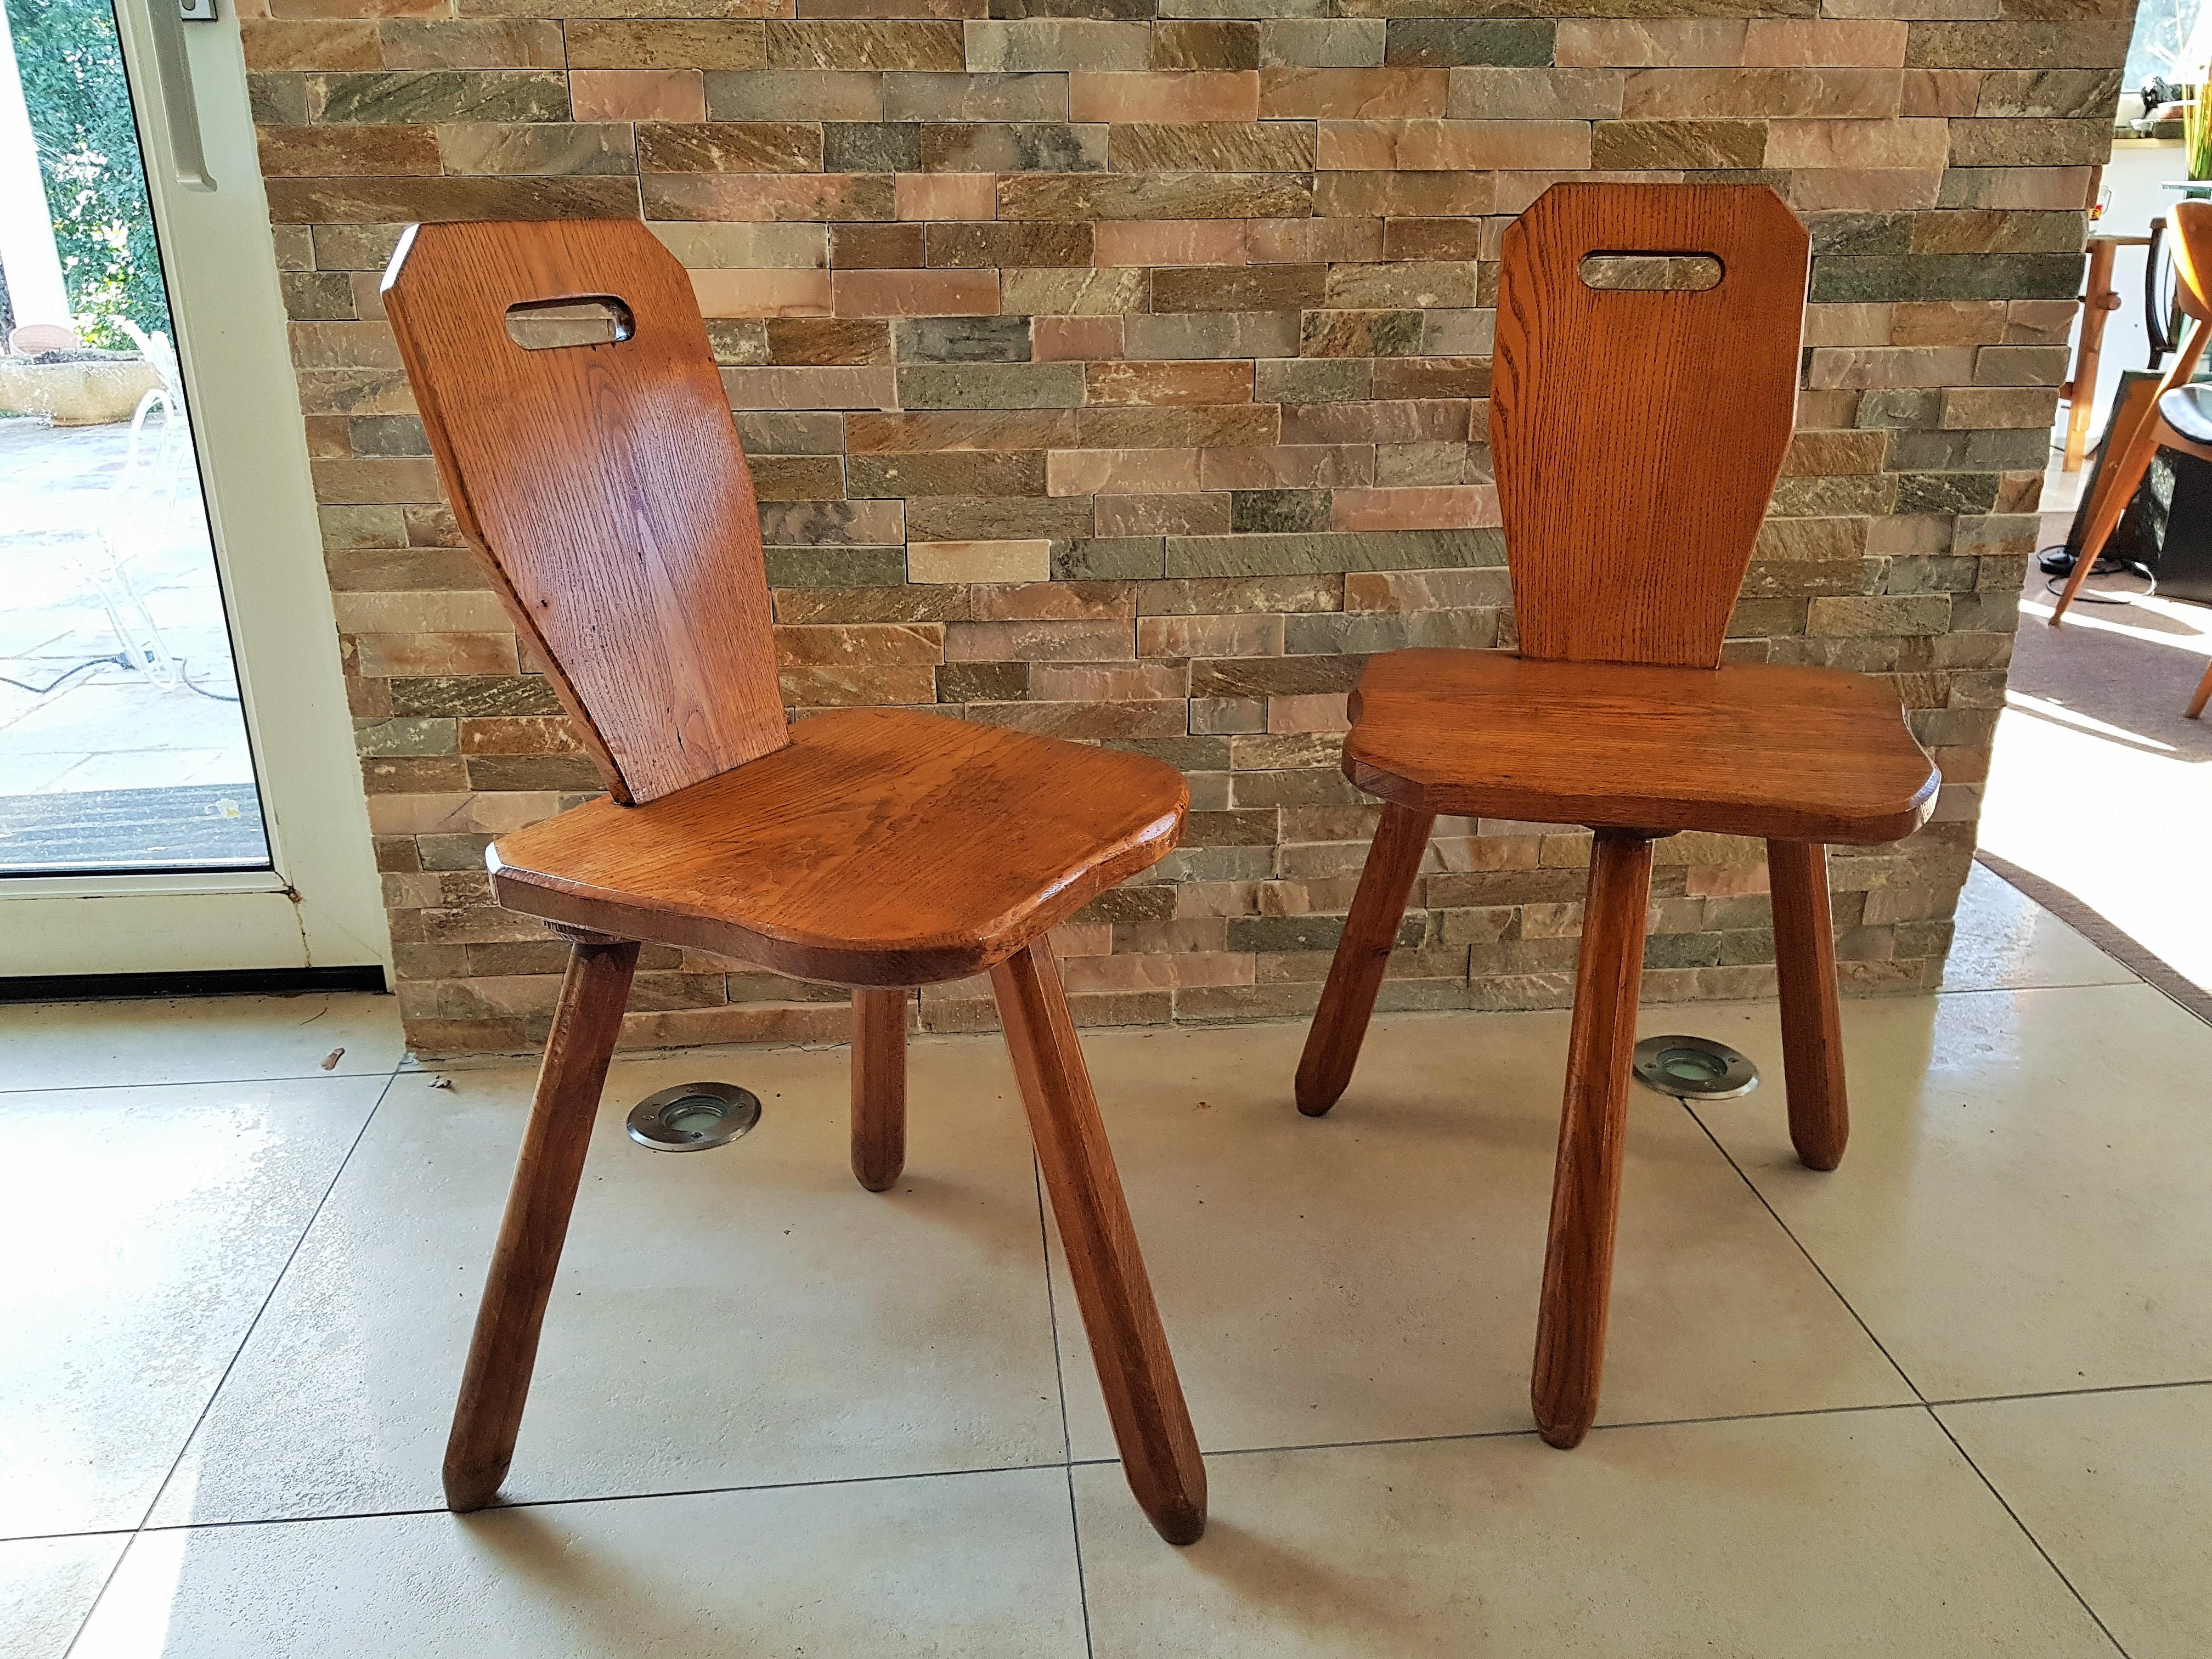 Midcentury pair of chairs or stools attributed to Charlotte Perriand attributed to the manufacturer Les Arcs, France, 1950s. Very good vintage condition. Solid and stabile.
rustic, minimal design.

